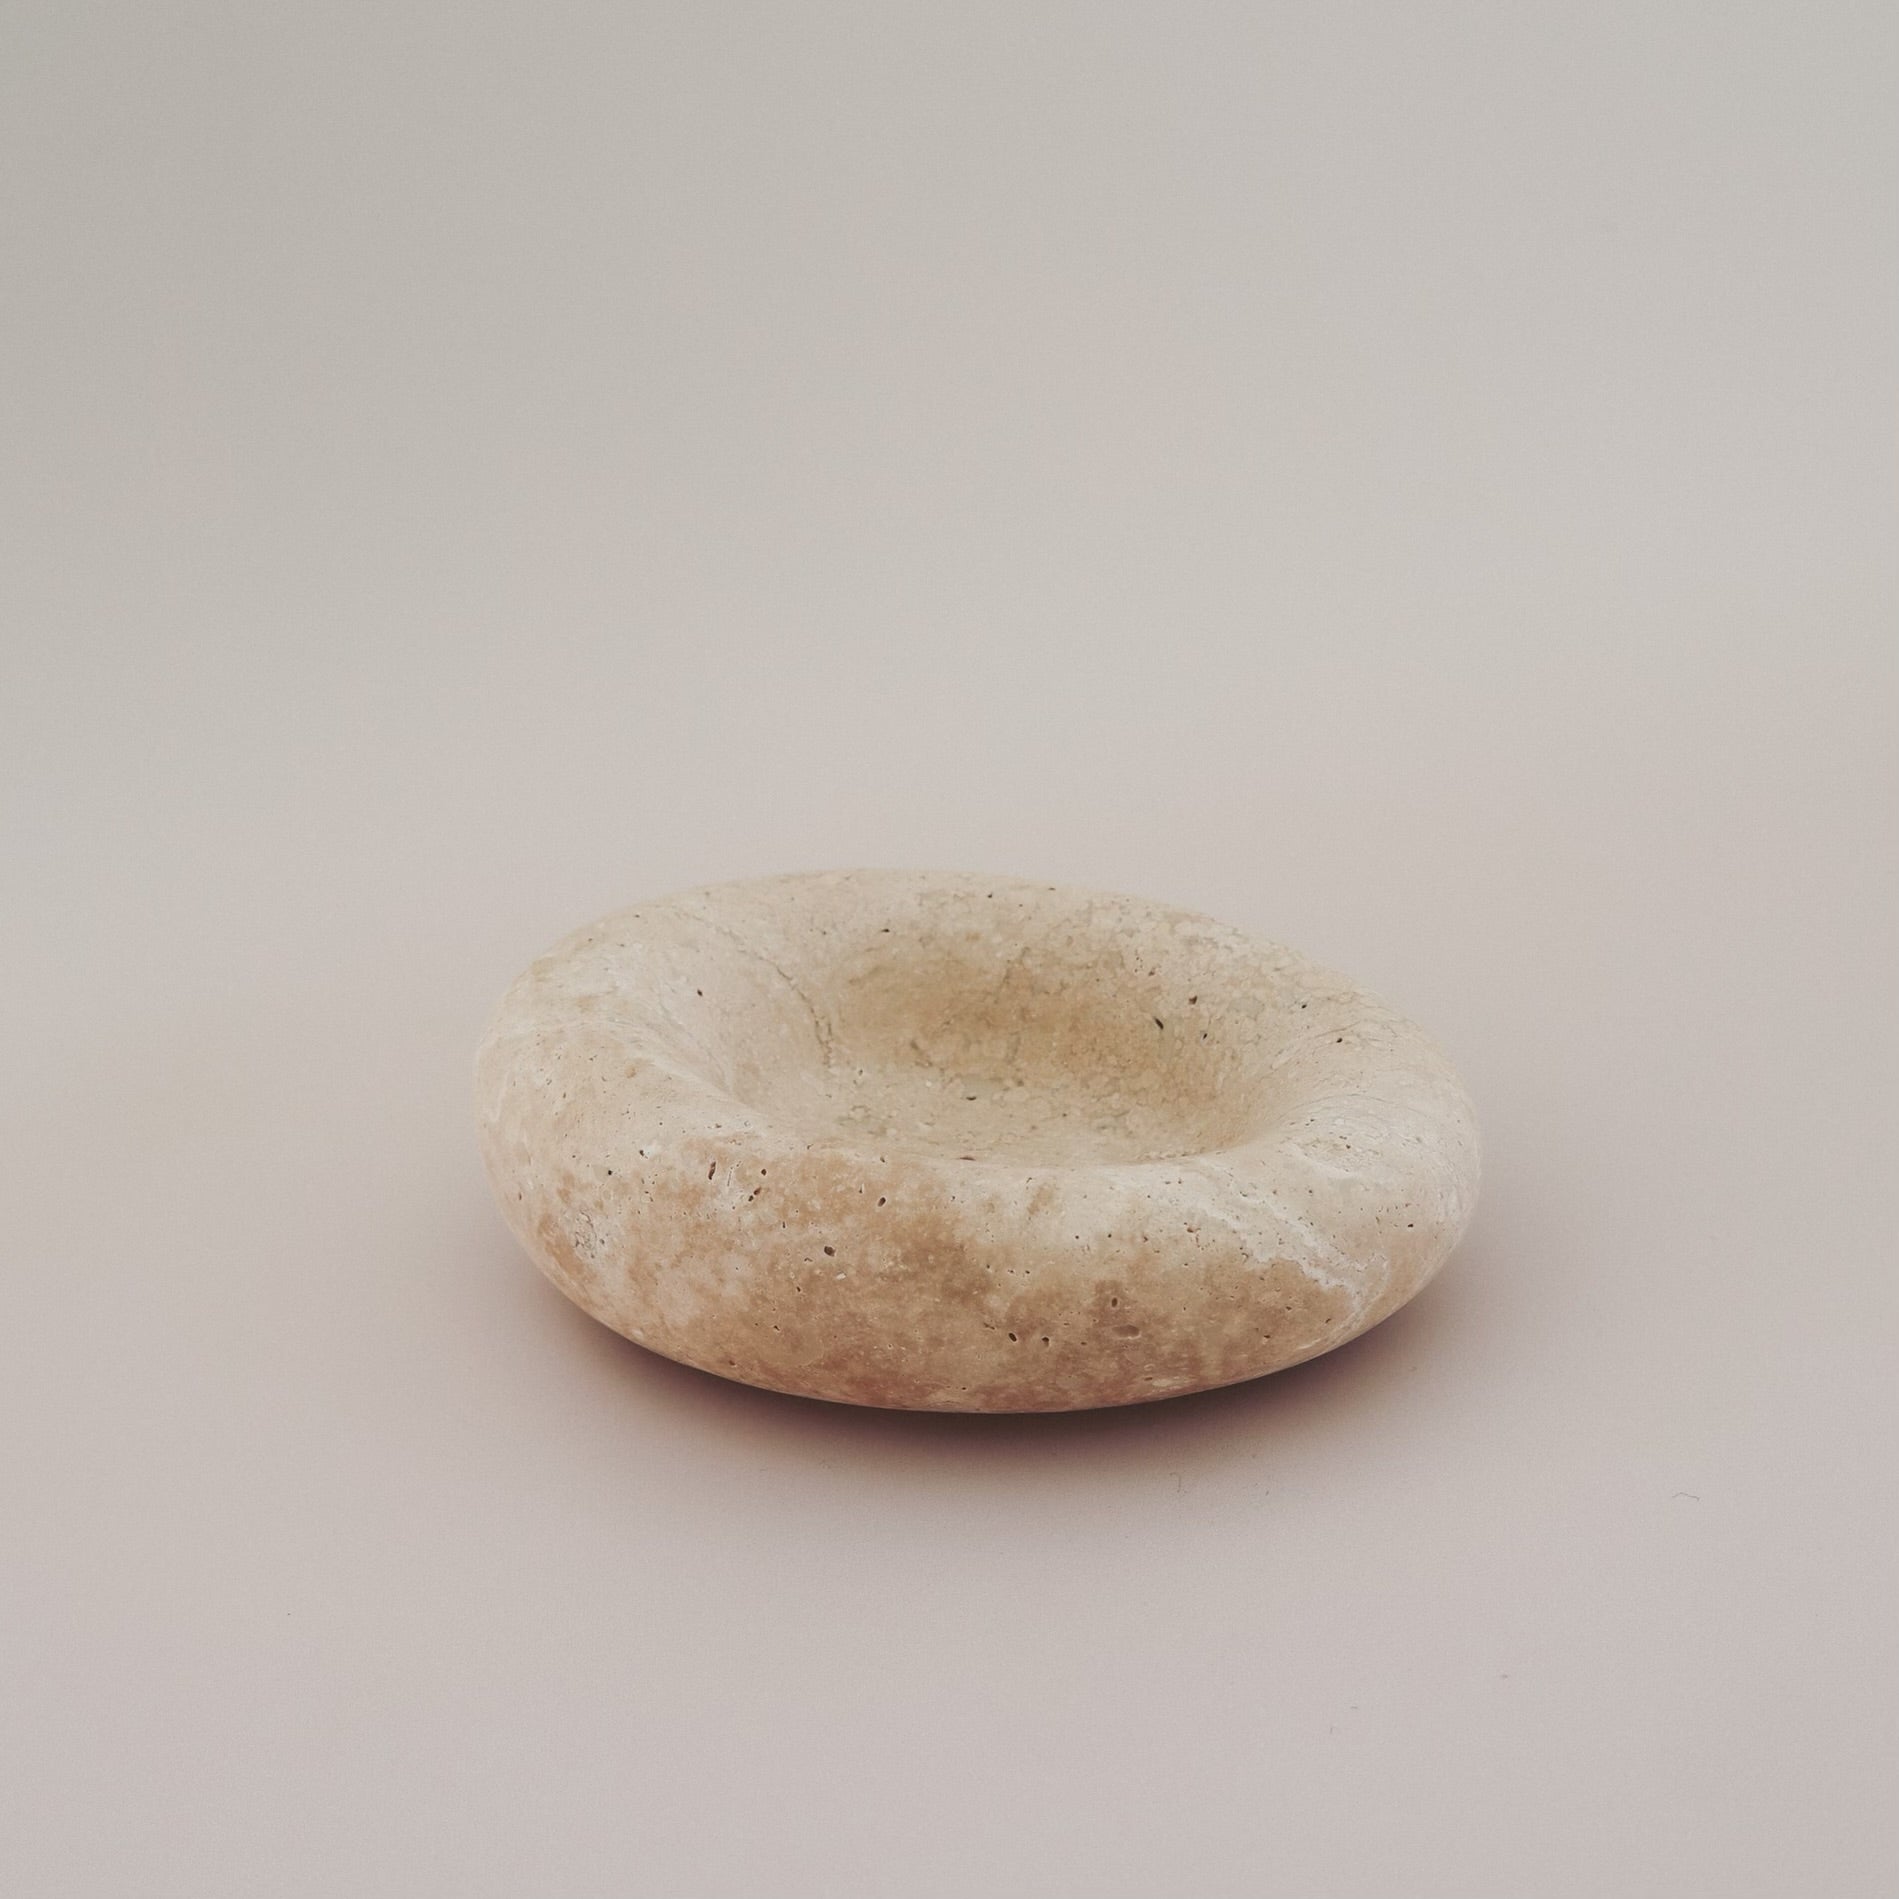 COTHEORY ECLIPSE SCULPTED INCENSE HOLDER BOWL:  BEIGE TRAVERTINE